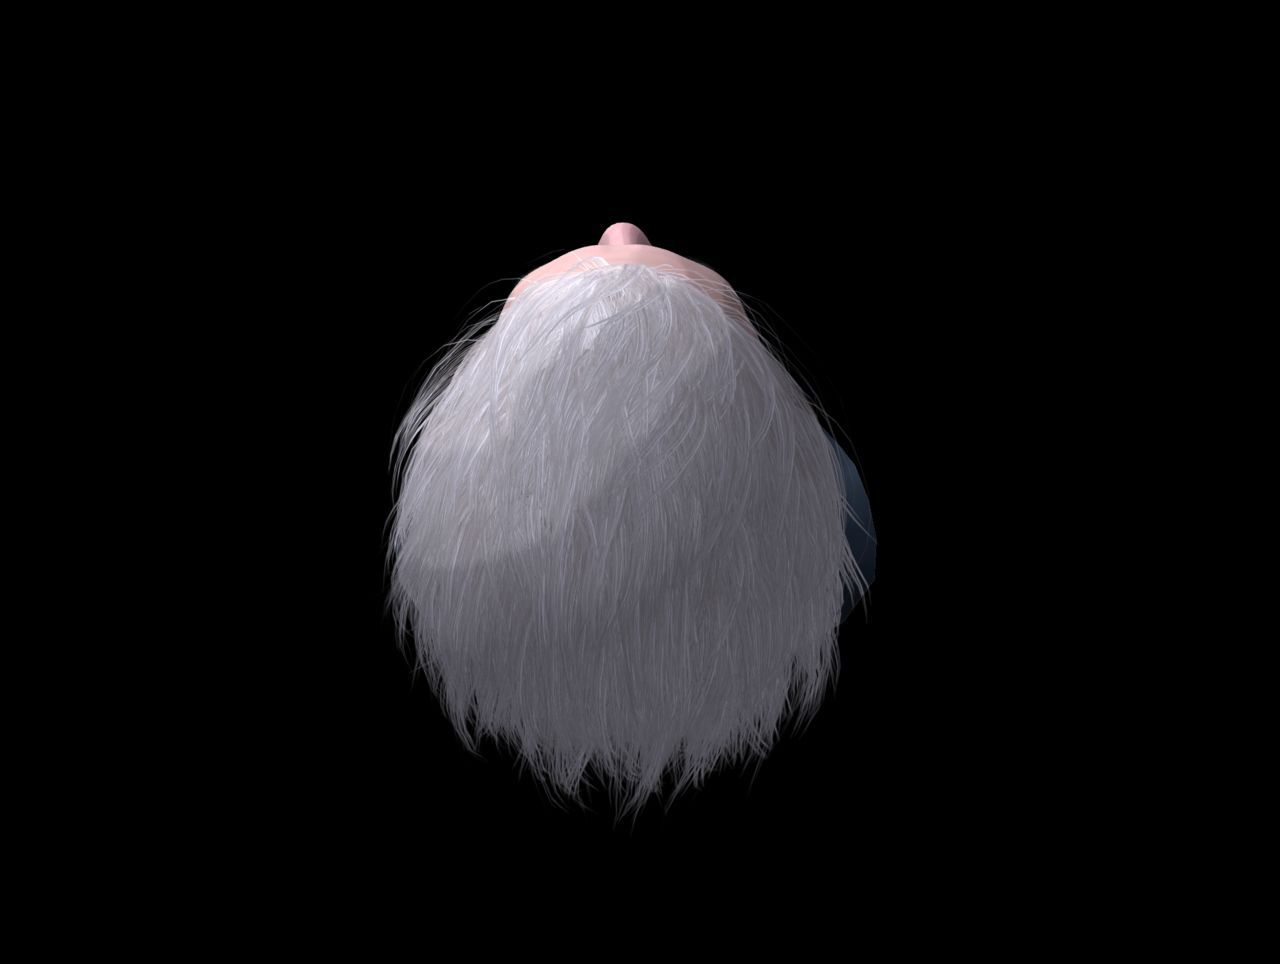 [J.A.] DMC5 | Vergil Head Reference PNG 43